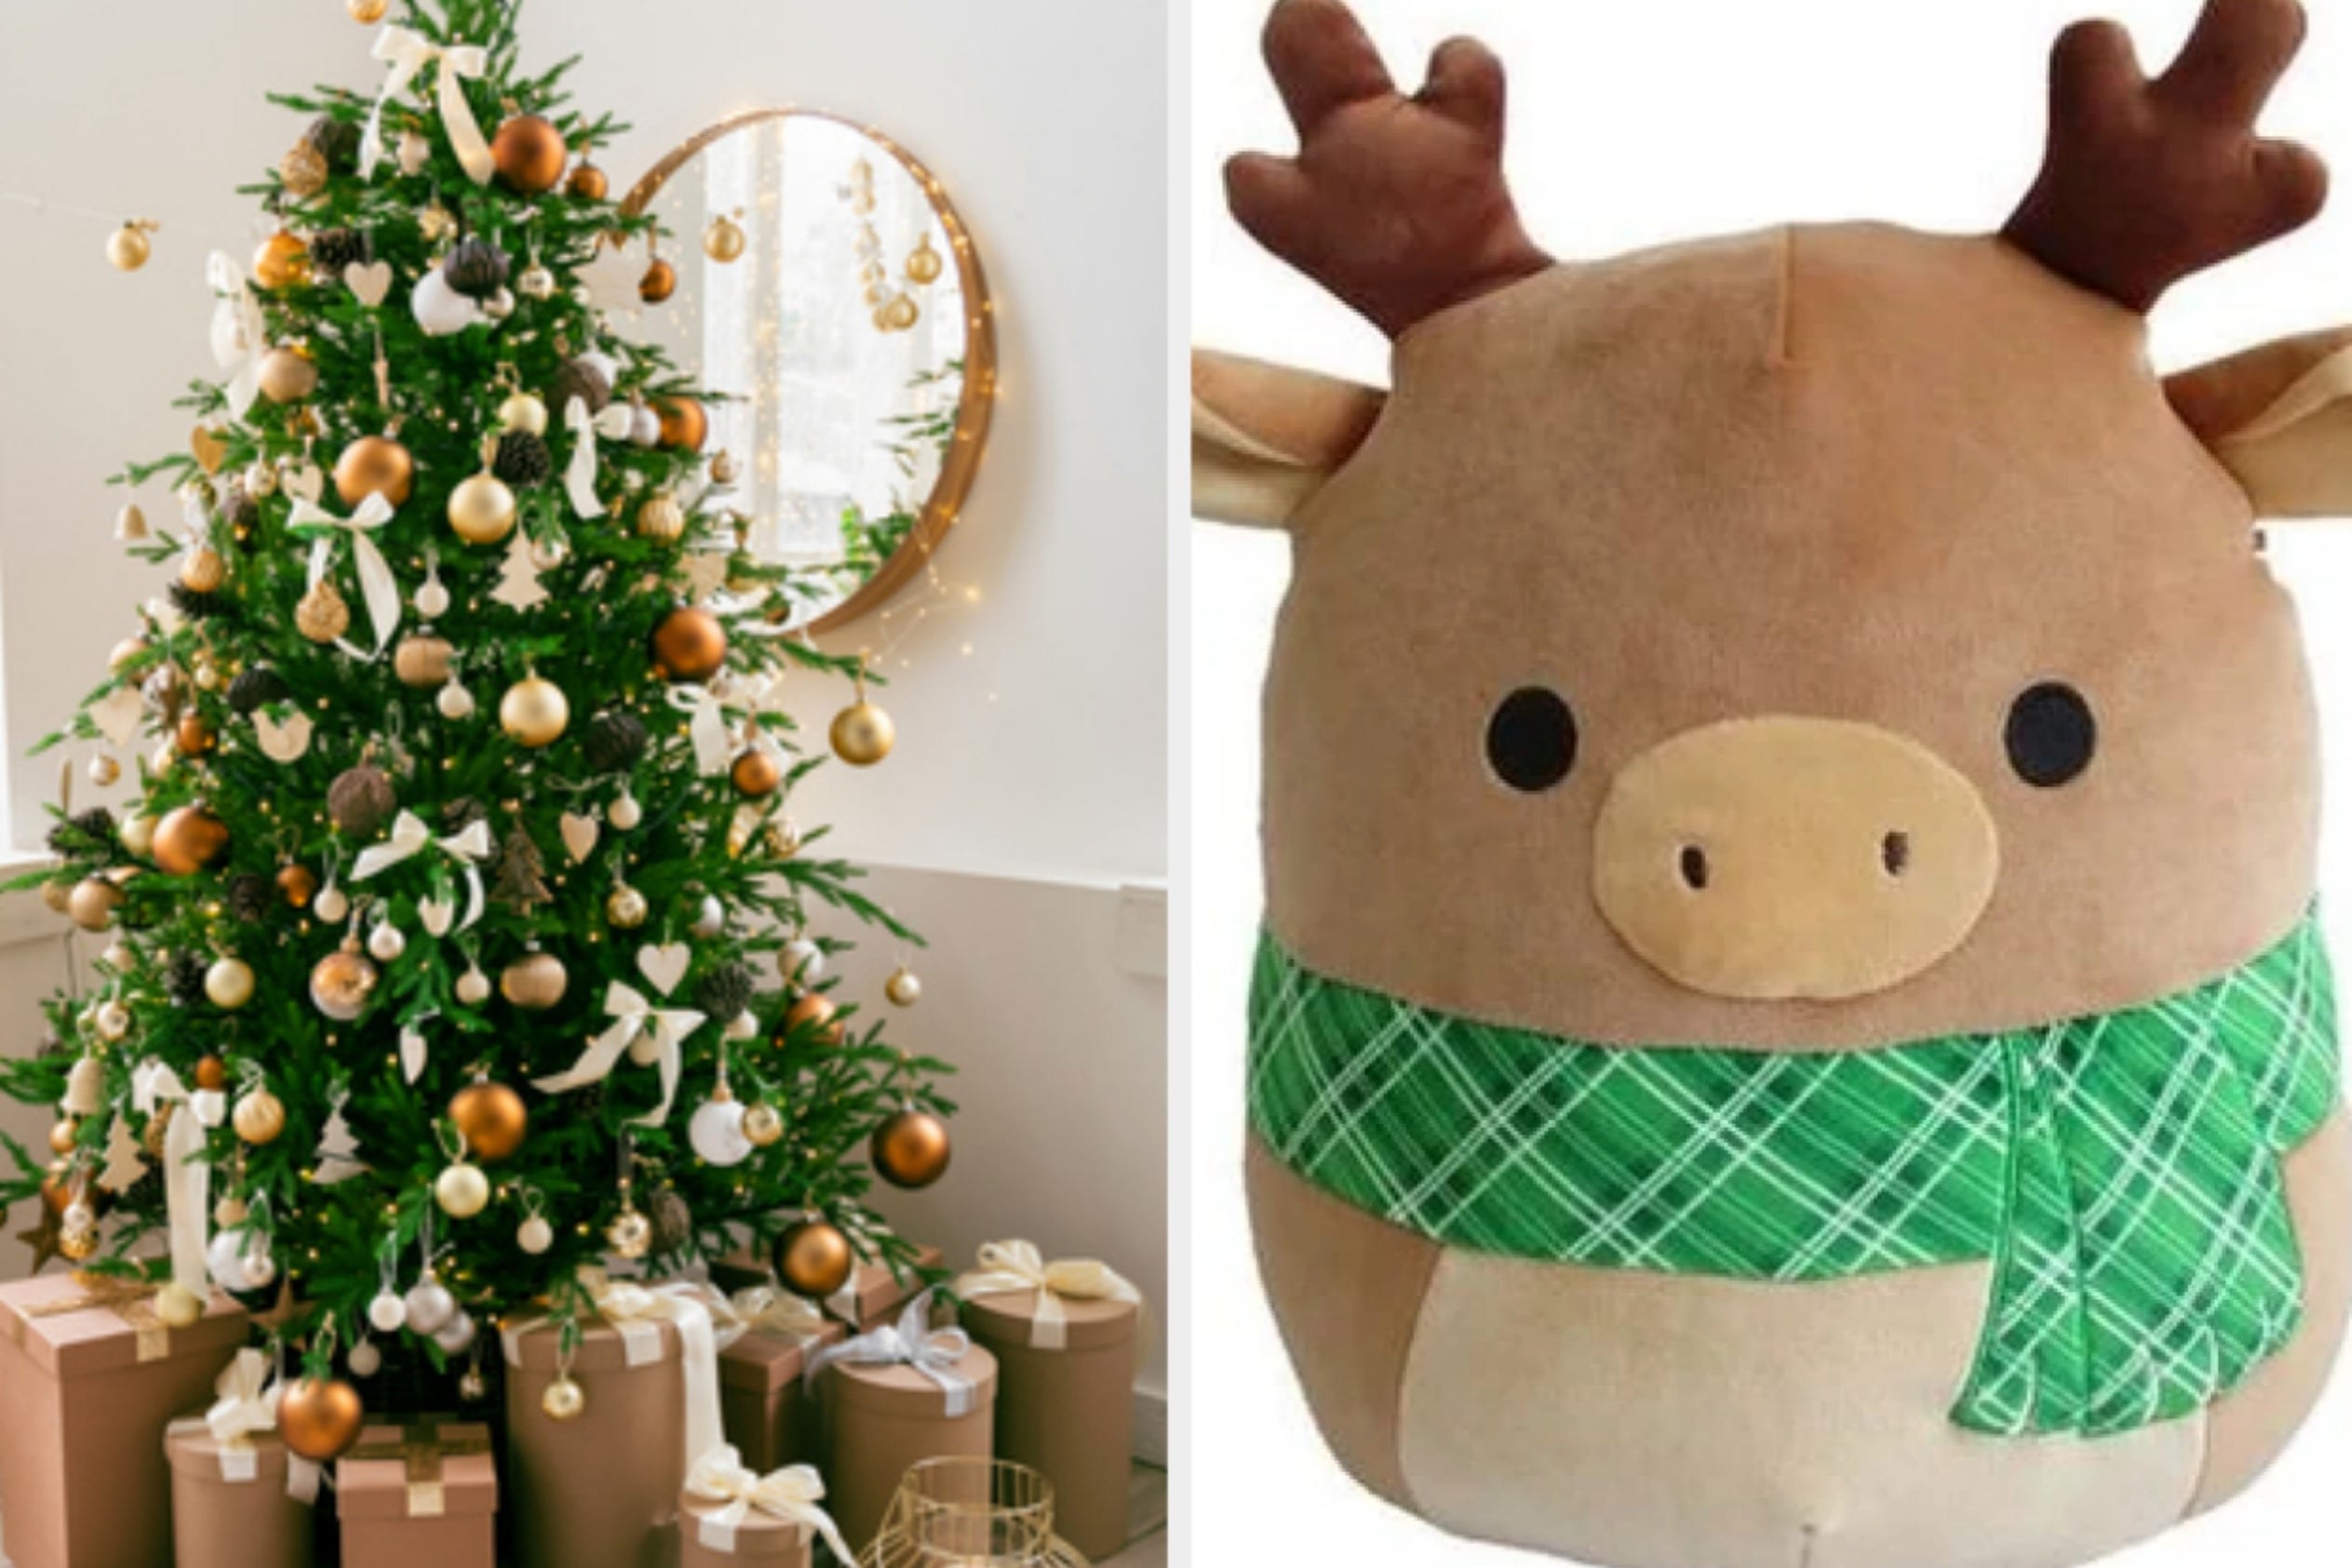 On the left, a Christmas tree with wrapped presents underneath it, and on the right, Ruby the Reindeer Squishmallow